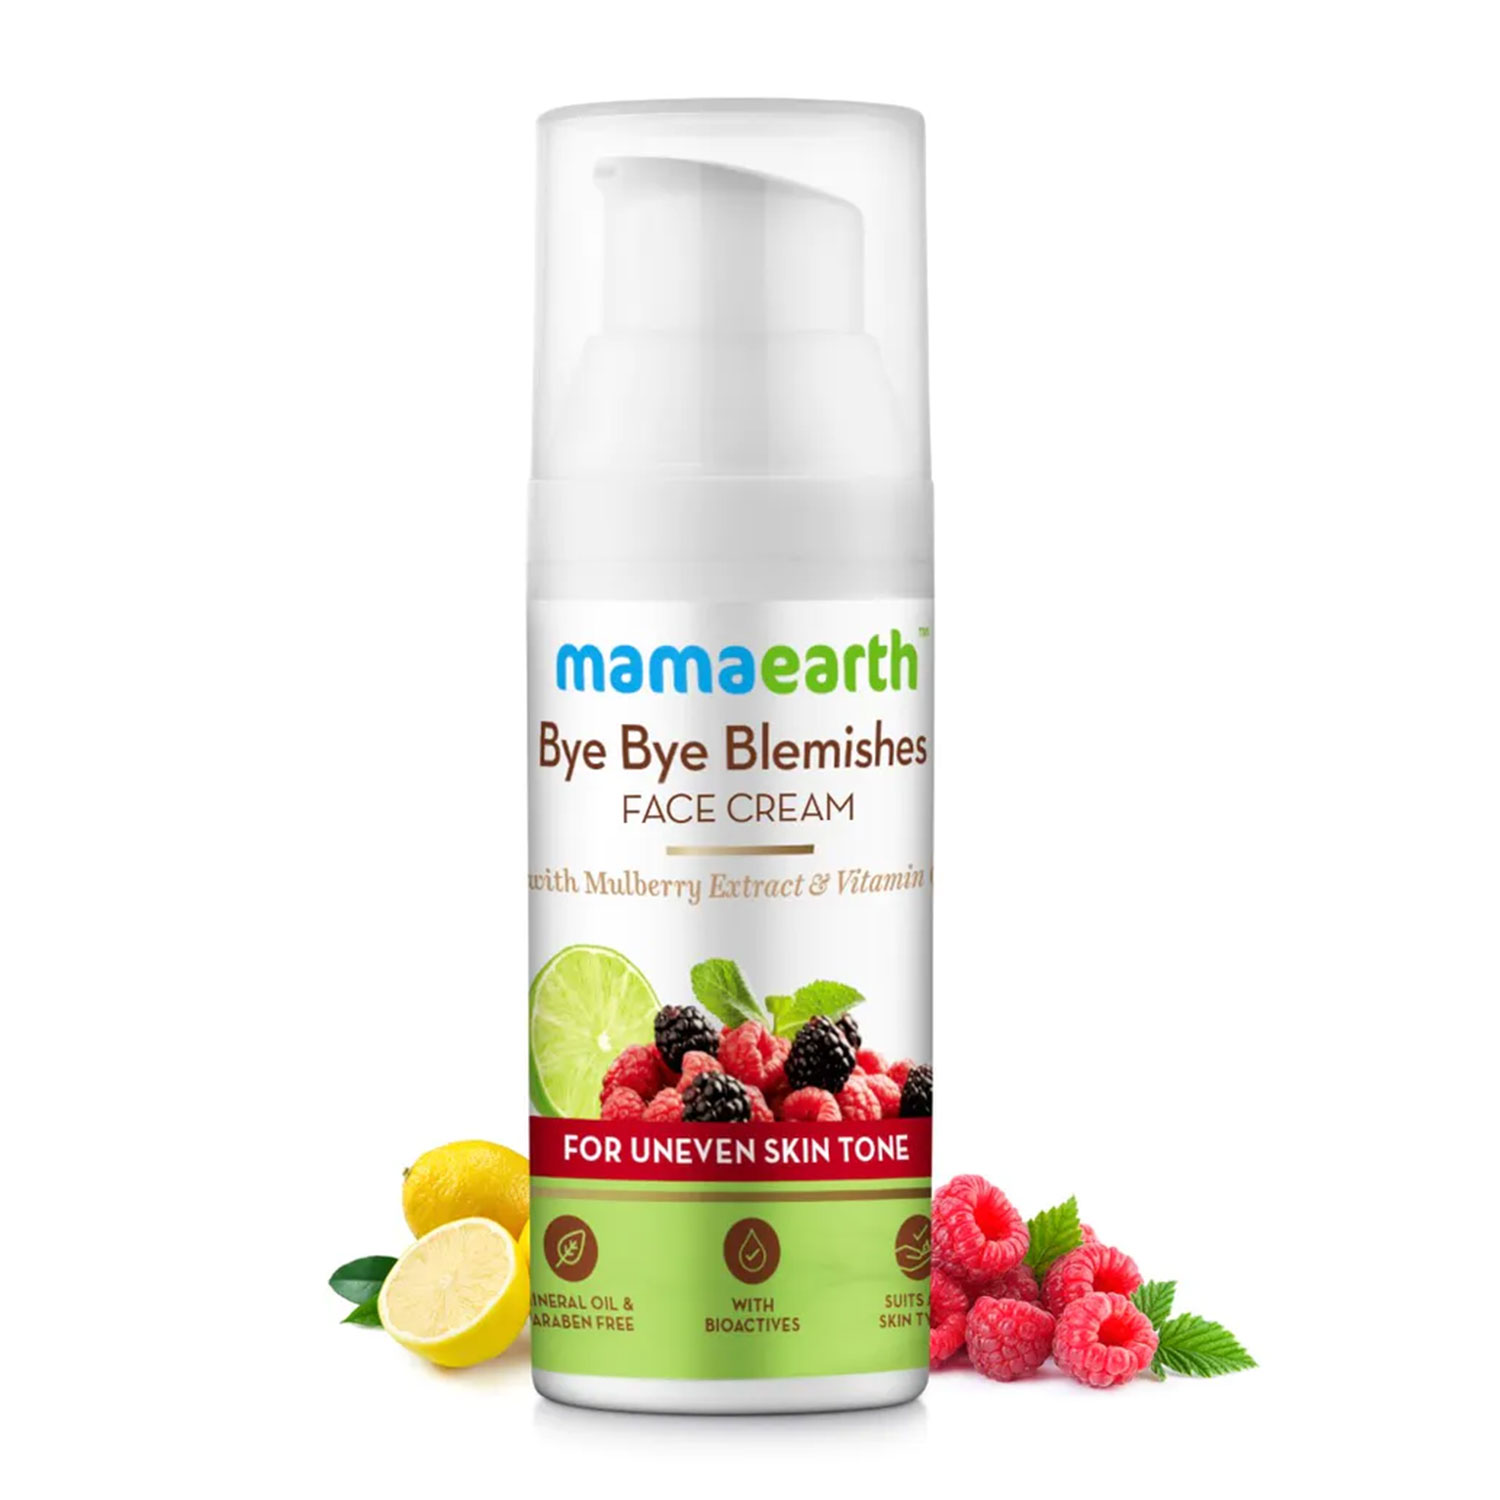 Mamaearth Bye Bye Blemishes Face Cream, 30 ml